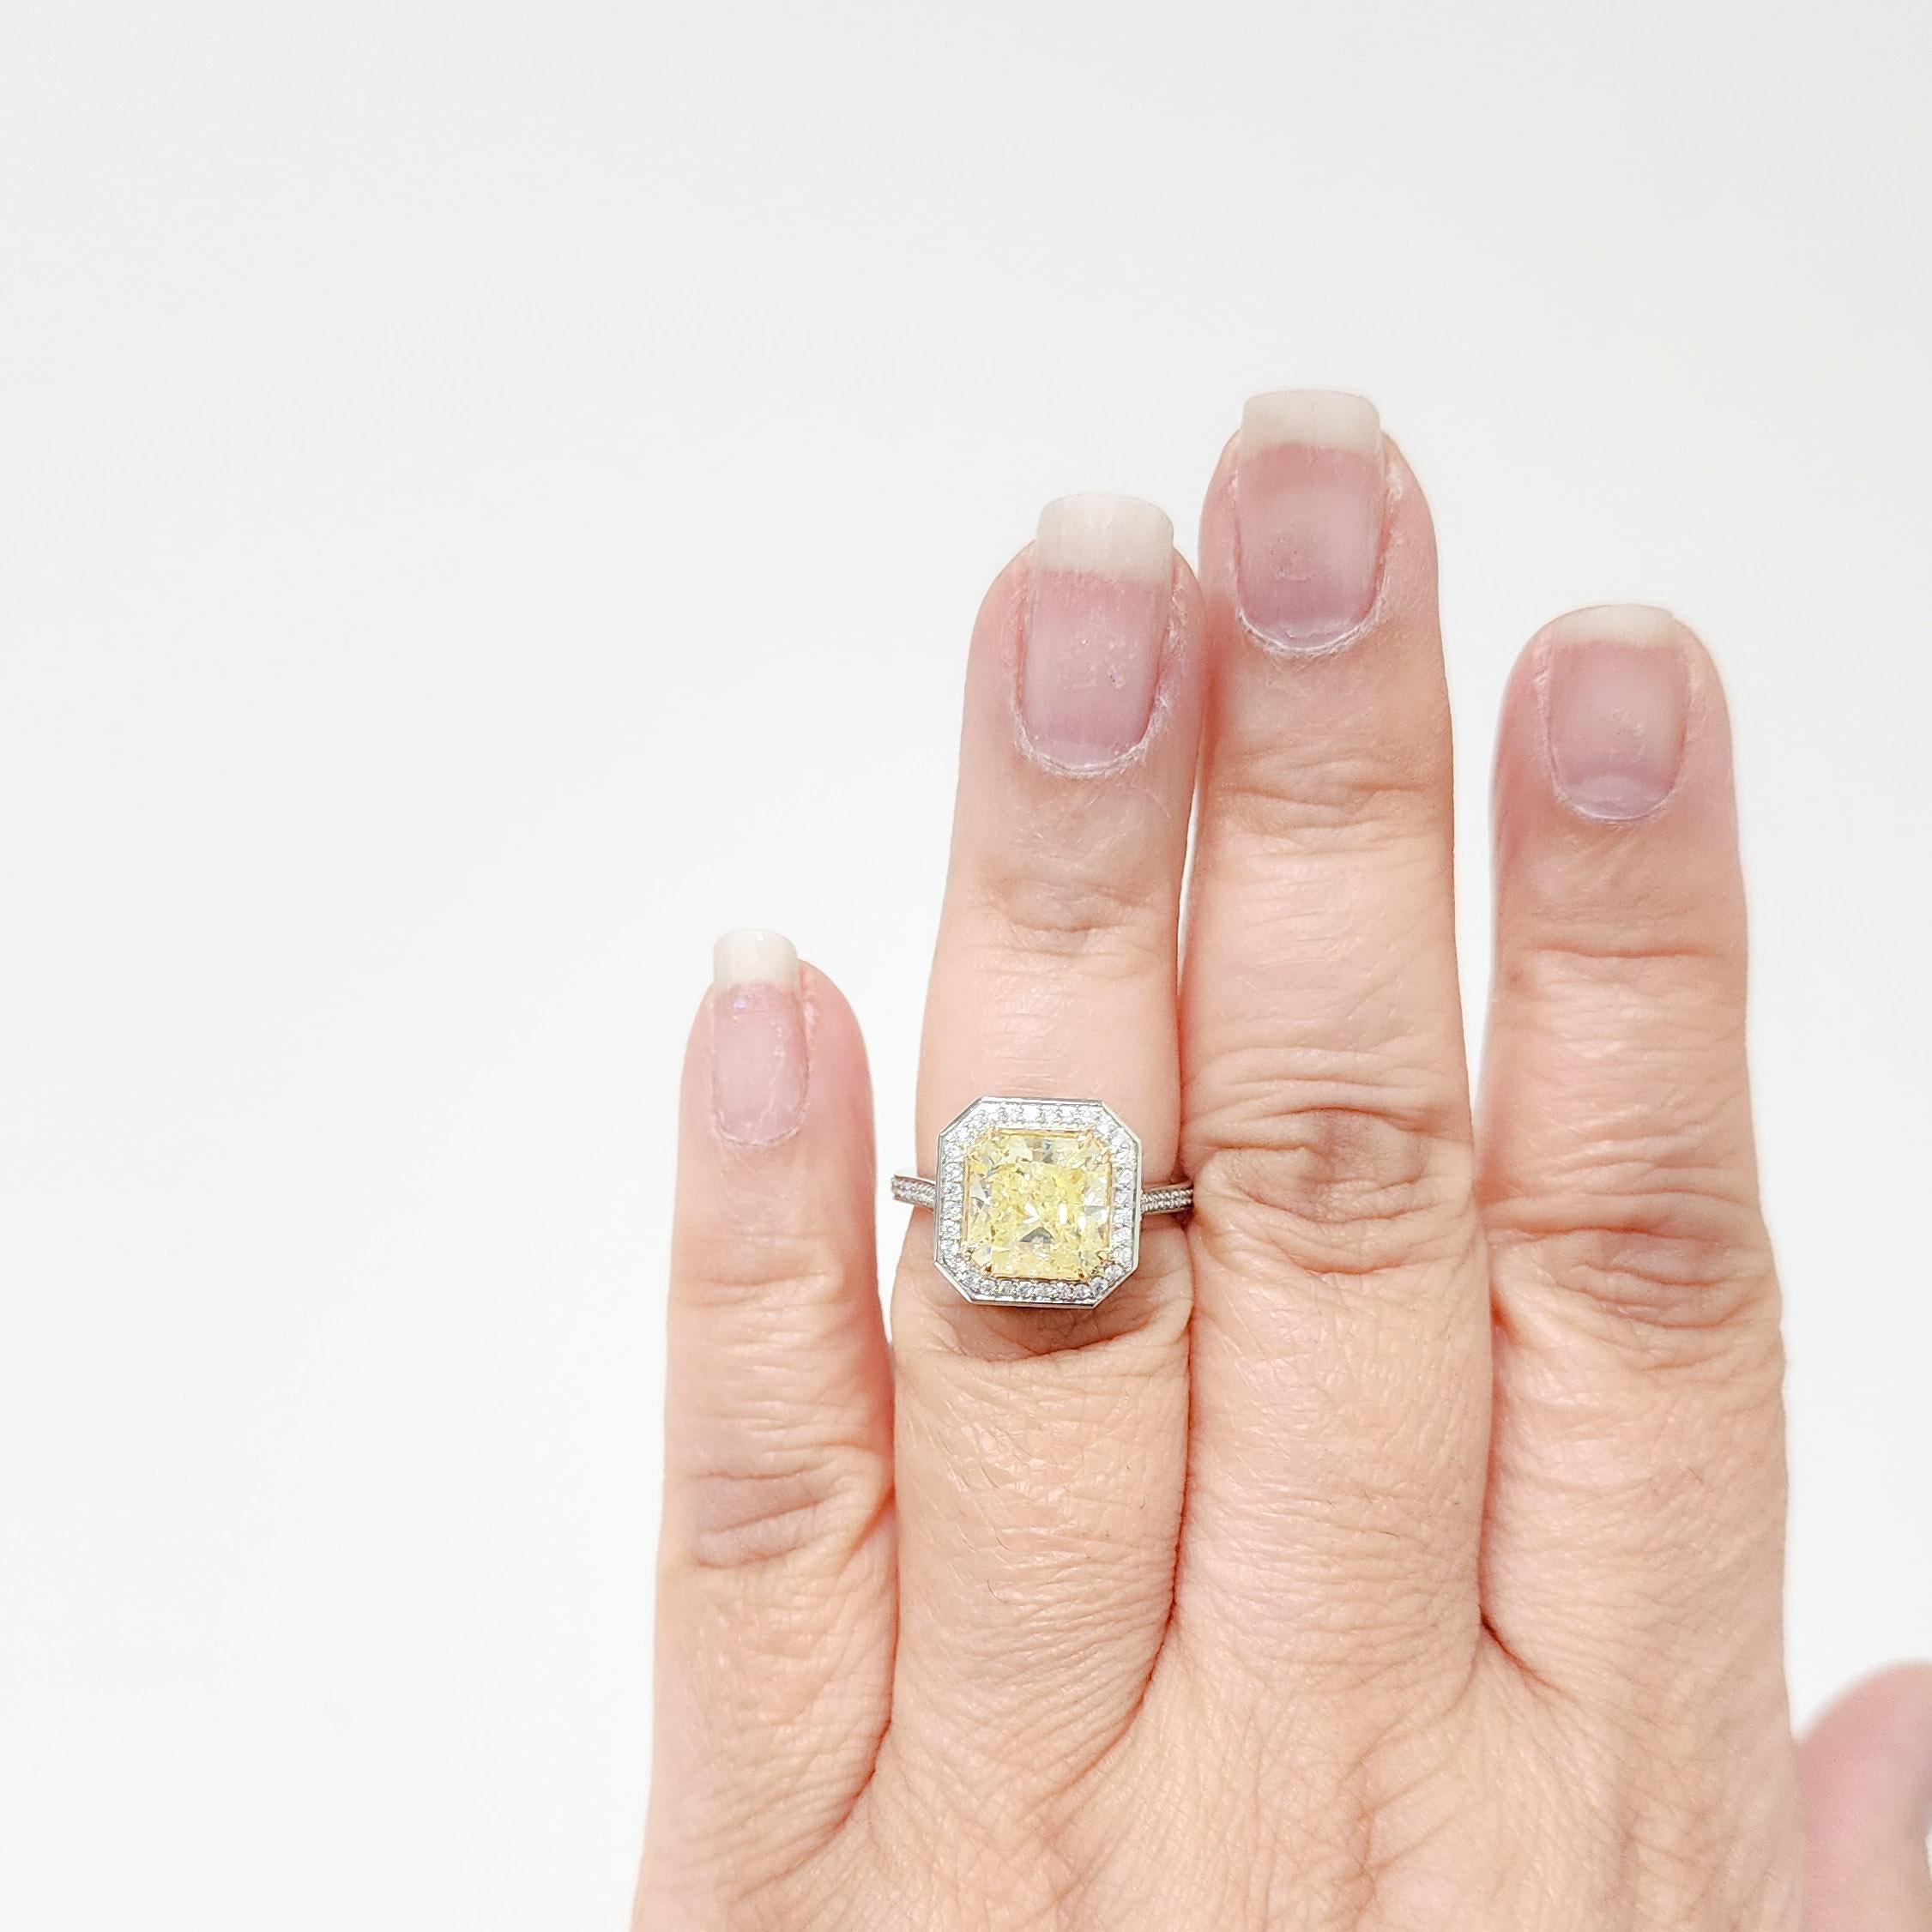 Beautiful 3.51 ct. GIA fancy yellow radiant diamond with 0.33 ct. good quality white diamond rounds.  Handmade in 18k yellow and white gold.  Ring size 6.25.  GIA certificate included.